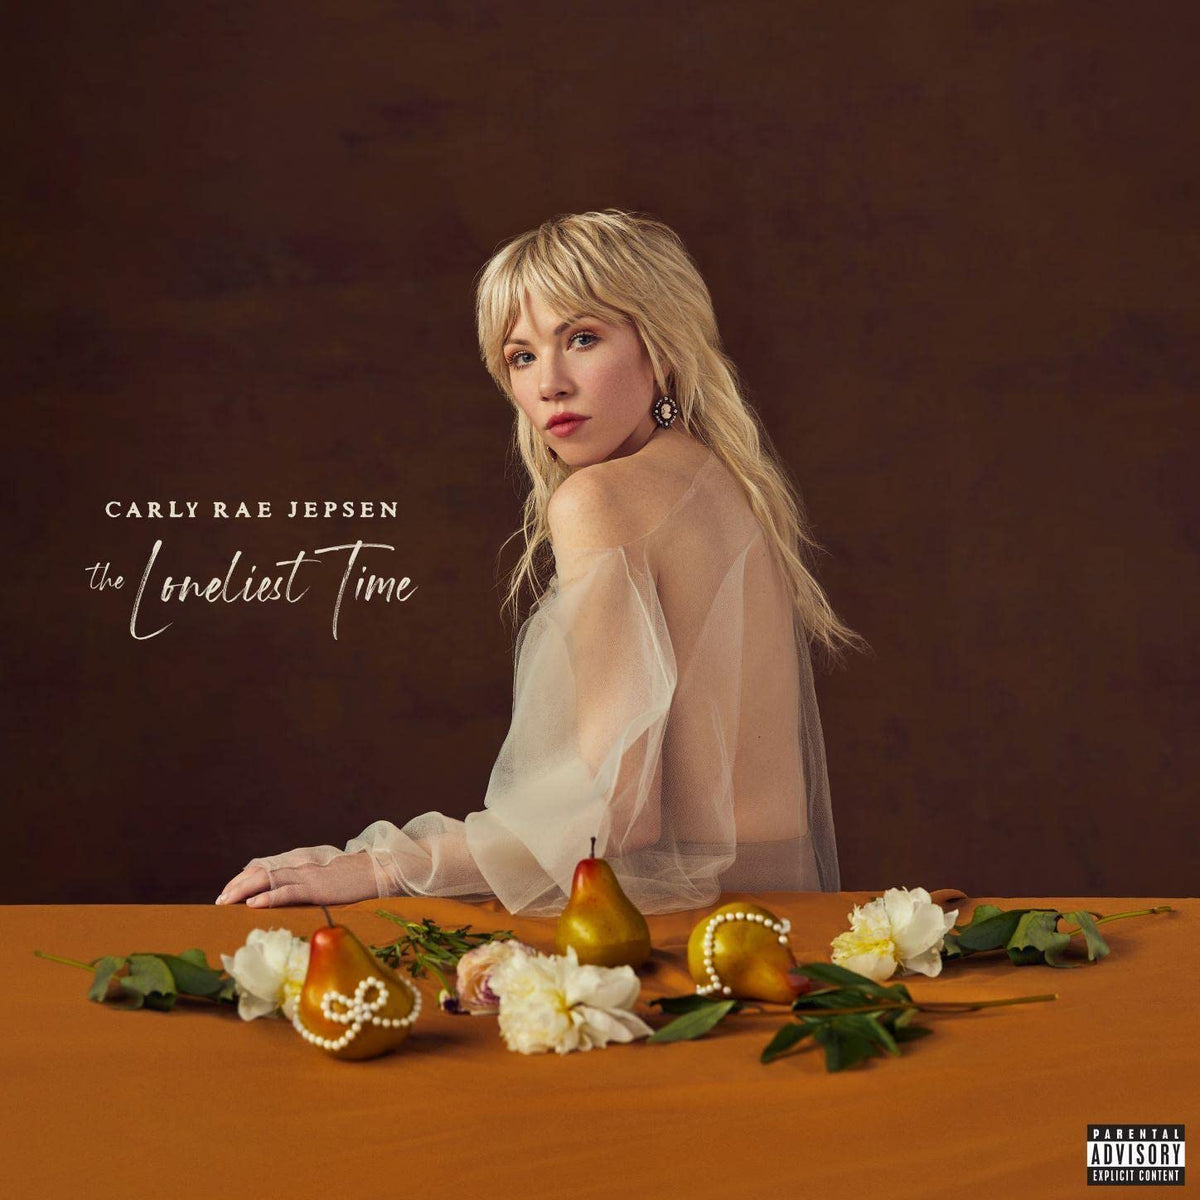 Carly Rae Jepsen - The Loneliest Time LP